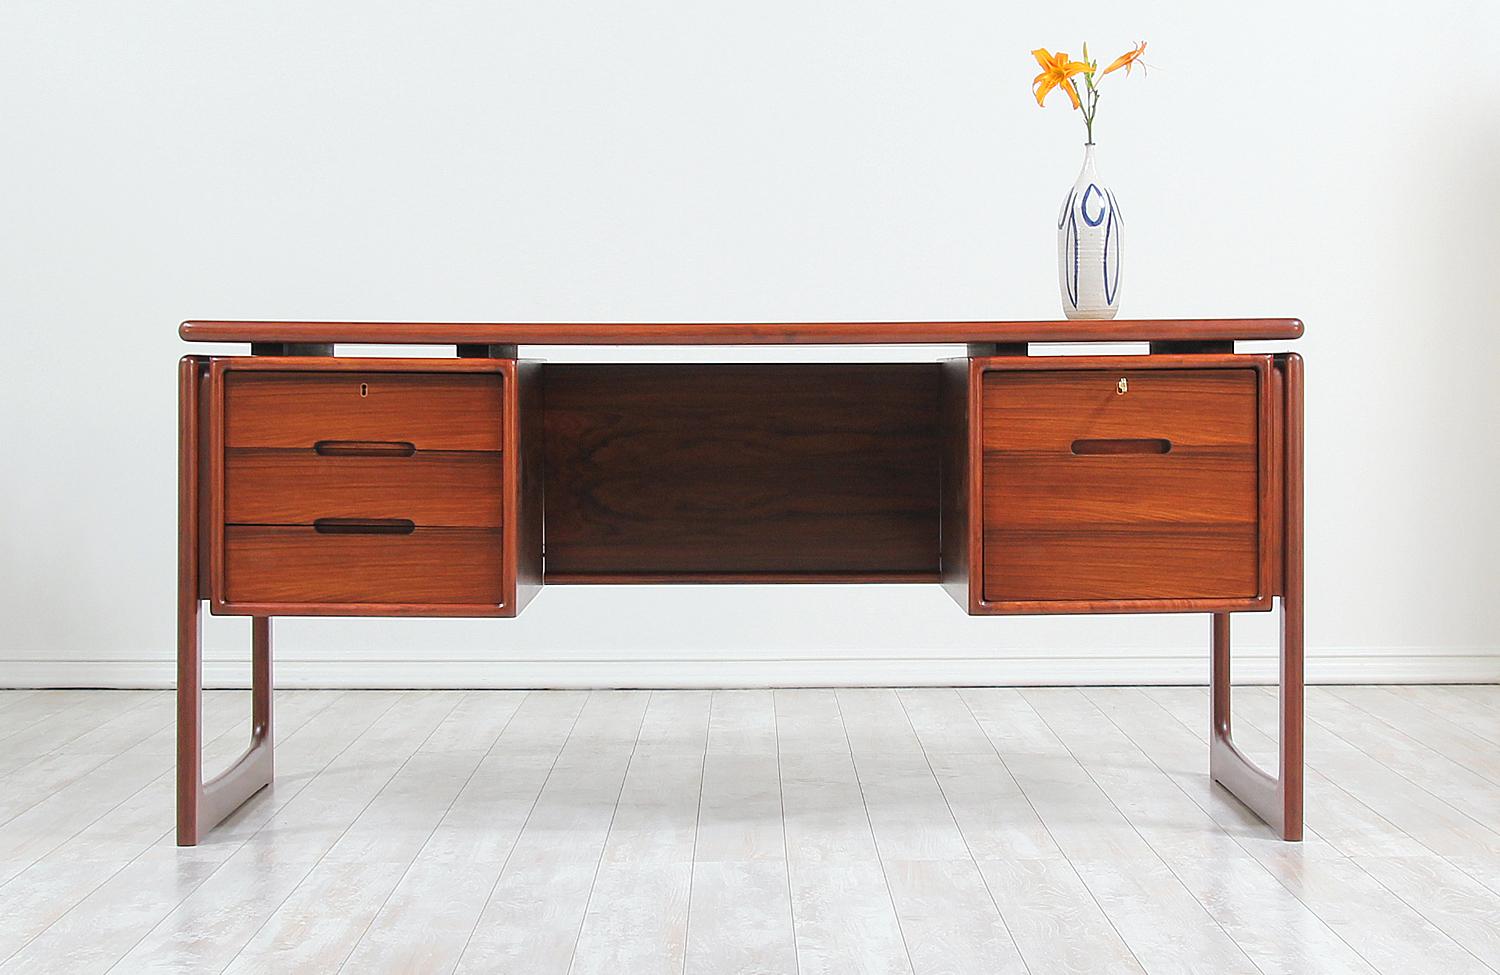 Stylish modern executive desk designed and manufactured in Denmark by Dyrlund, circa 1960s. This striking Danish modern design features a rosewood frame and three spacious drawers on the left side, a file cabinet on the right, and an open back with